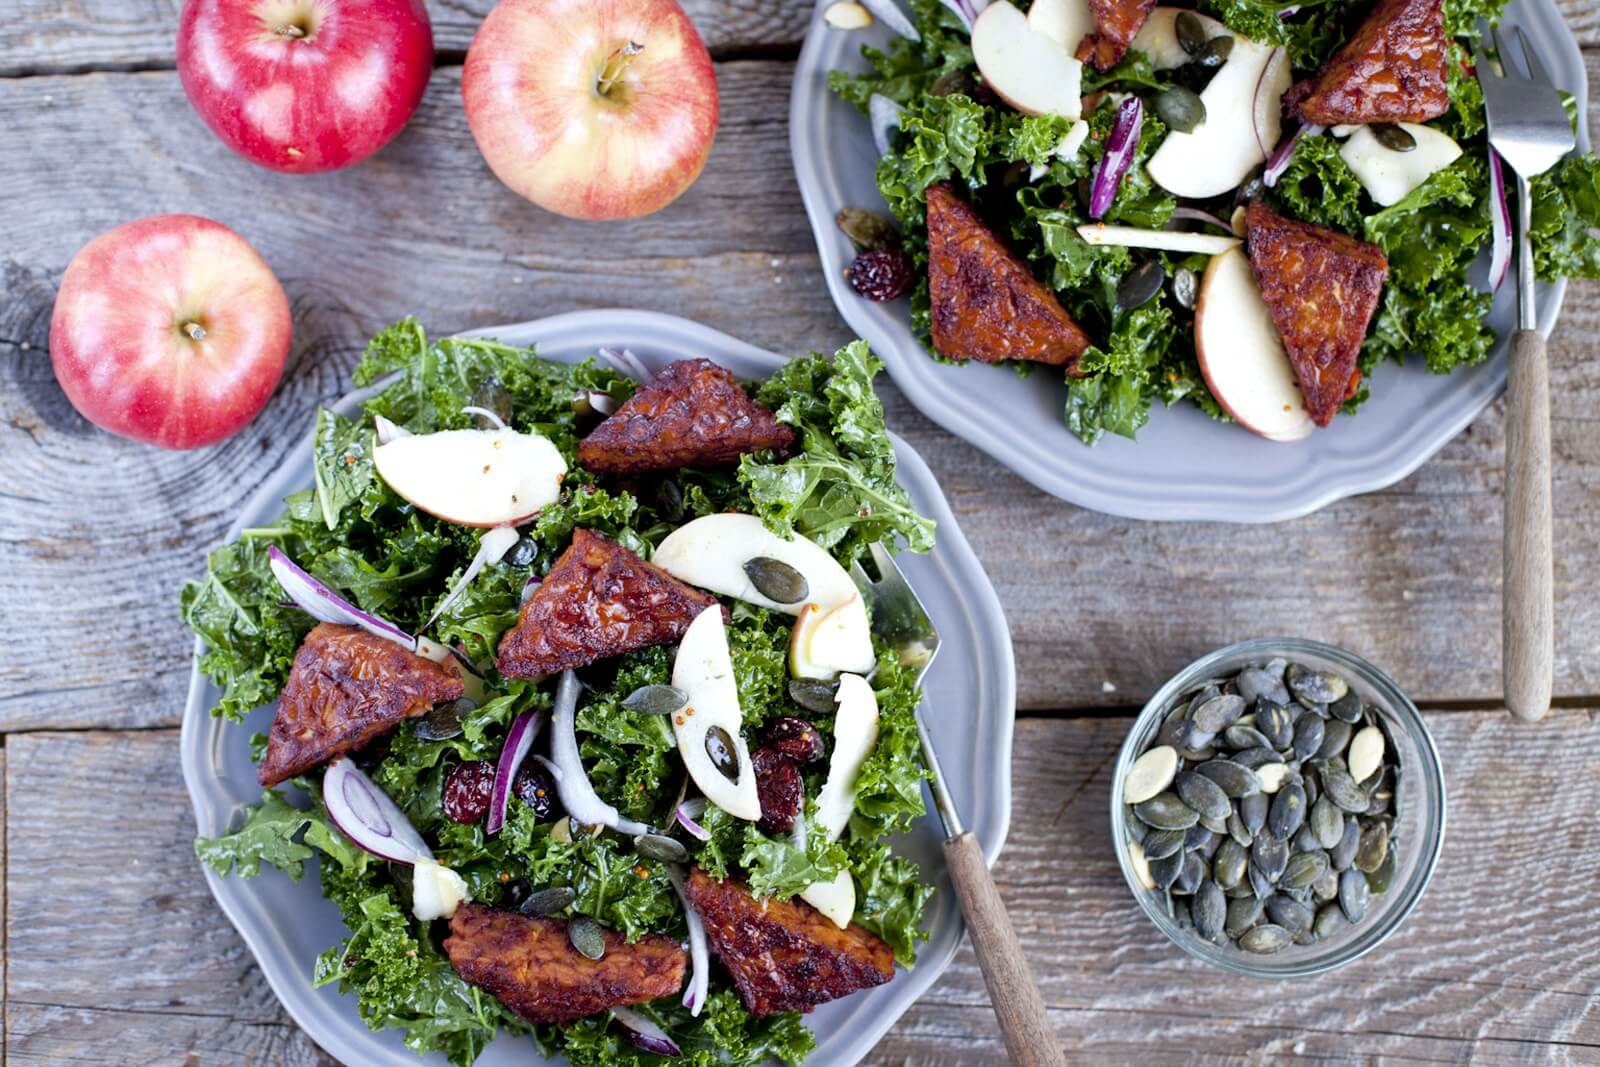 Image of Apple, Cranberry and Kale Salad with BBQ Tempeh